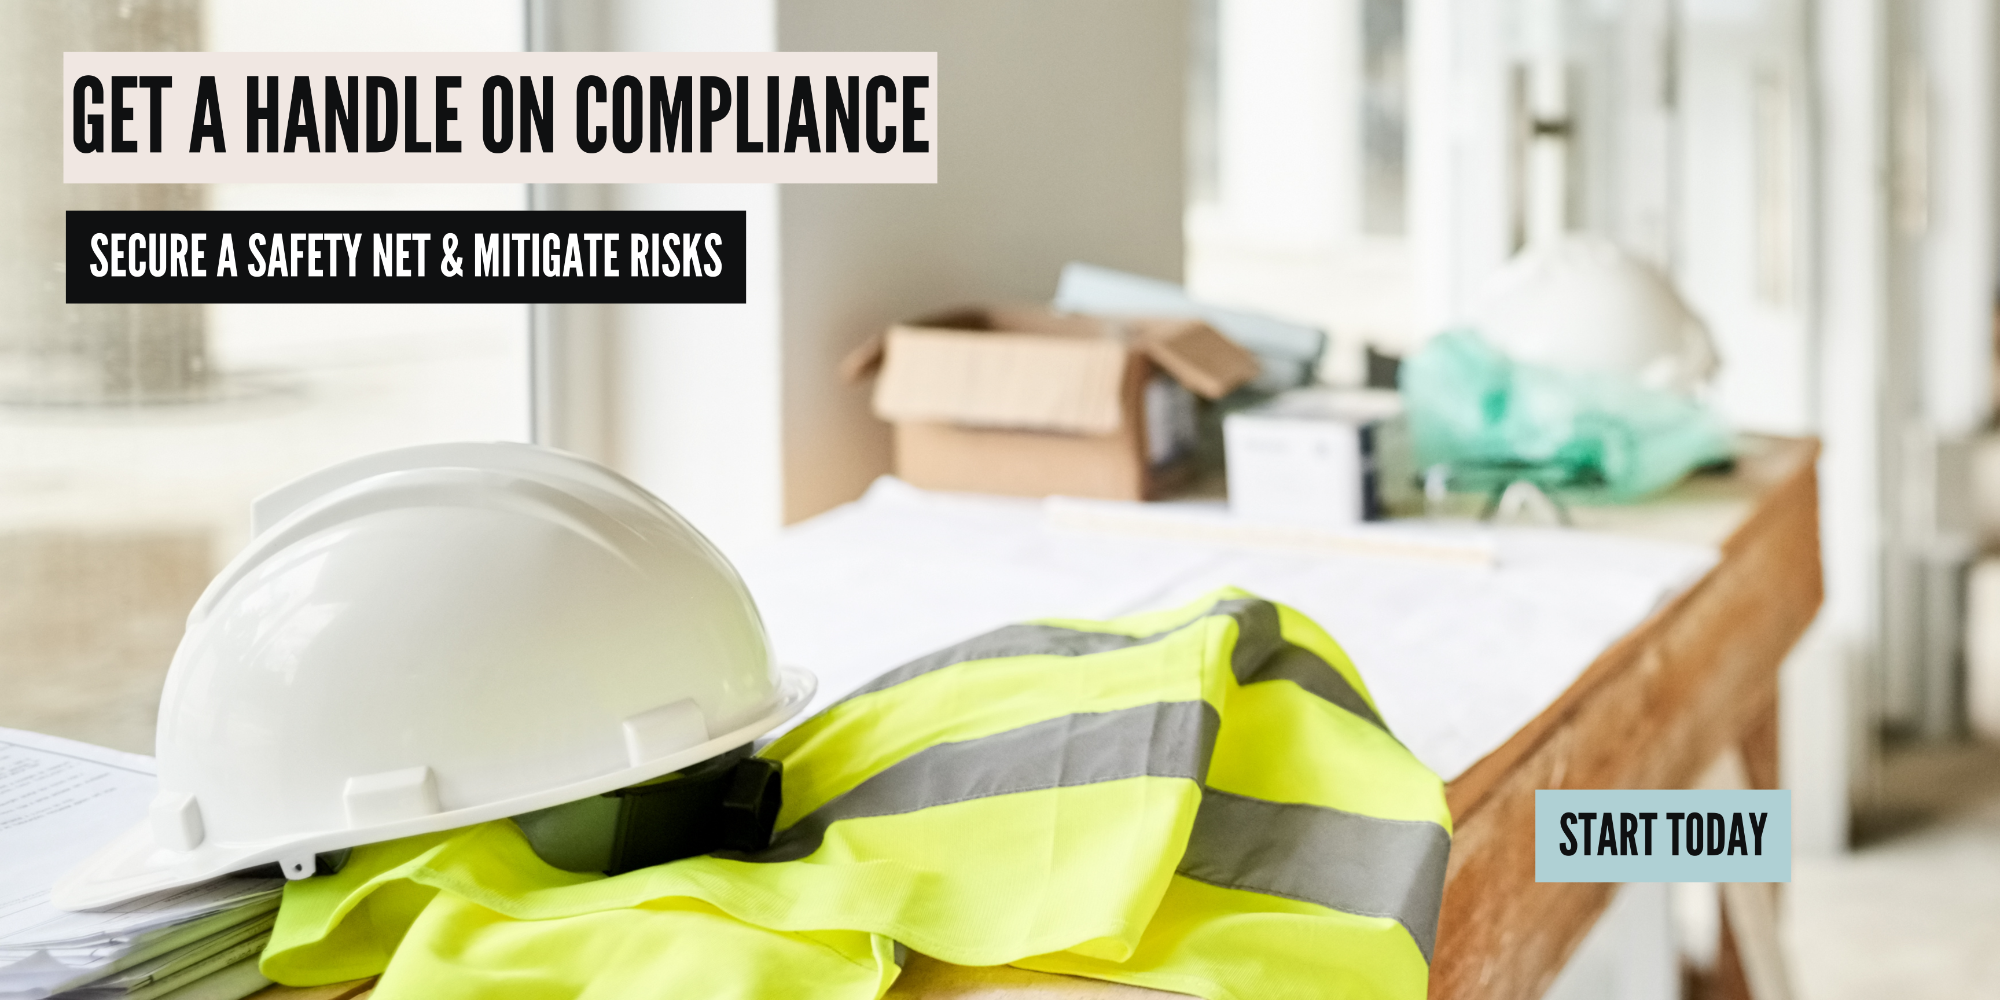 Image reads: Get a Handle on Compliance: Secure a Safety Net & Mitigate Risks